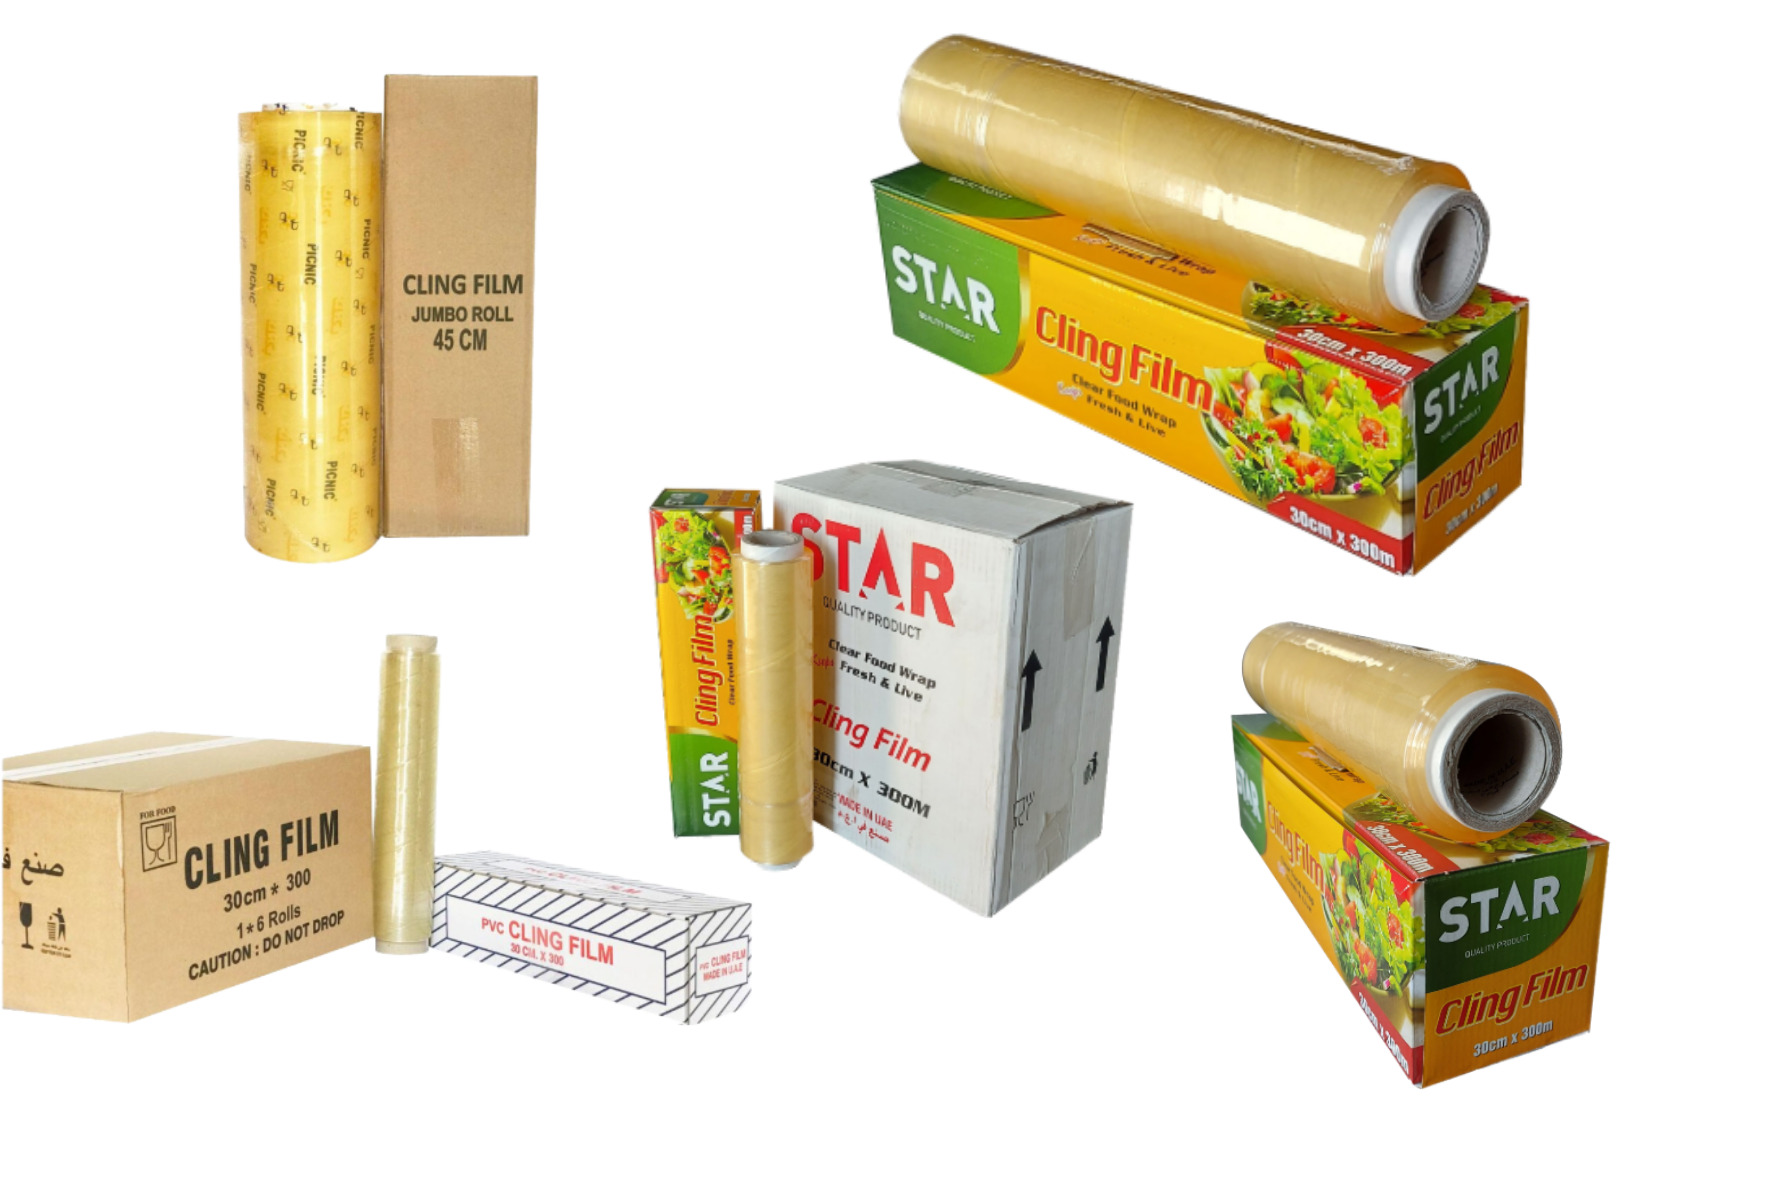 Bob Tapes - Clear/Brown - Al Afrah Plastic Product Trading